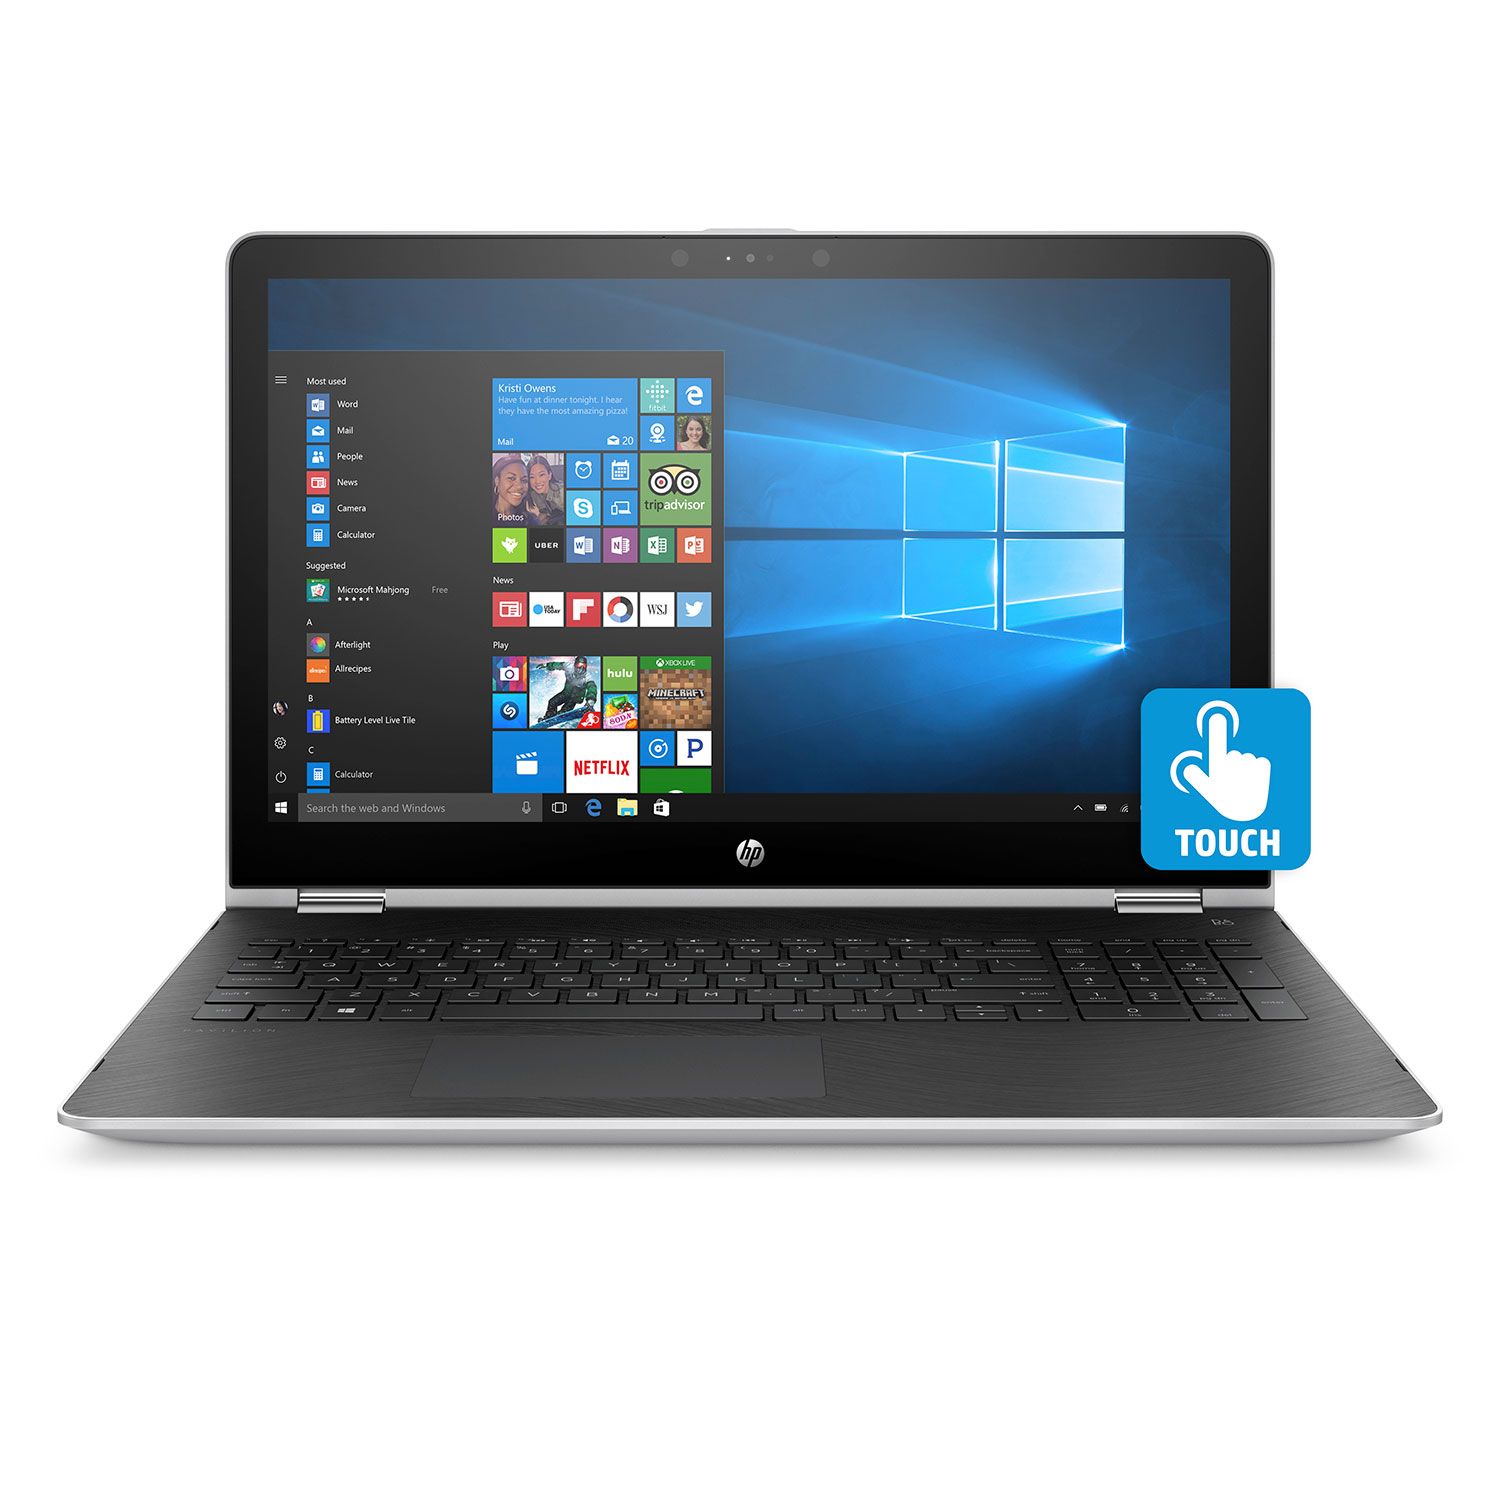 HP Pavilion X360 15-br159c 15.6″ Convertible Touch Laptop, 8th Gen Core i7, 16GB RAM, 1TB HDD